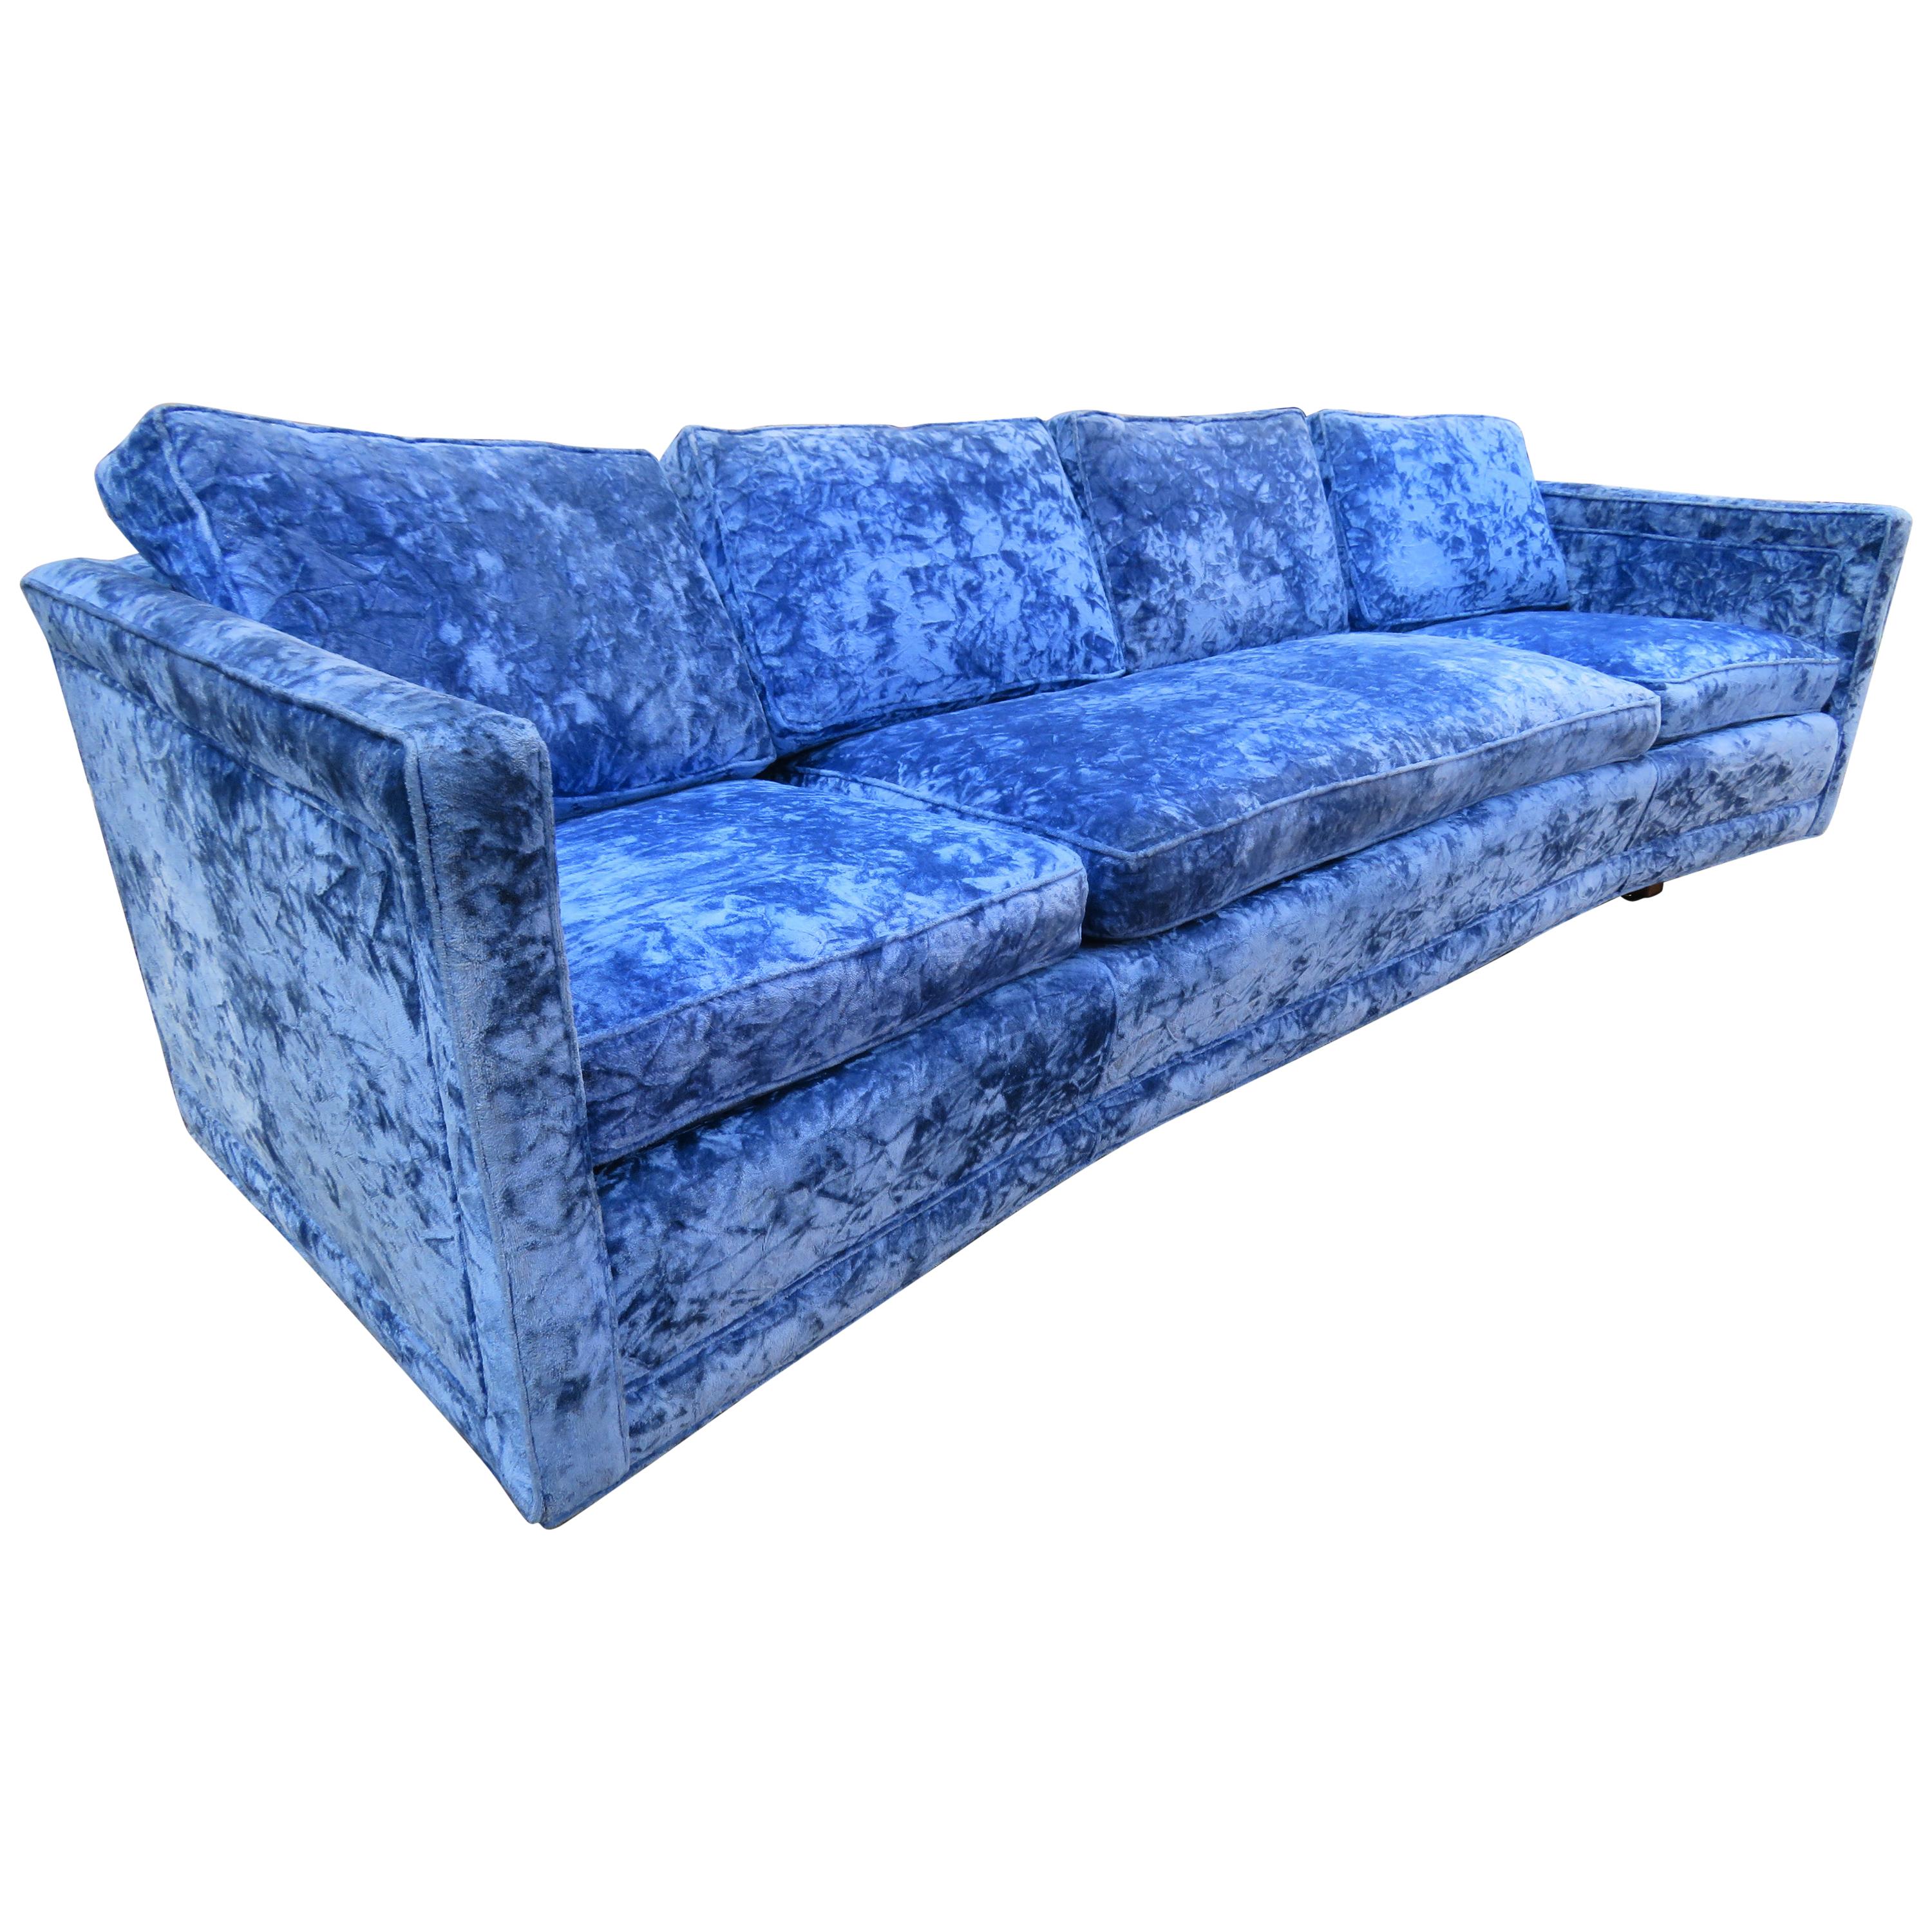 Stunning Erwin Lambeth curved back sled leg sofa. This sofa was reupholstered long ago in this wonderful sapphire blue crushed velvet and still looks great-only minor signs of age. We love the thick heavy solid walnut sled legs-handsome indeed! This